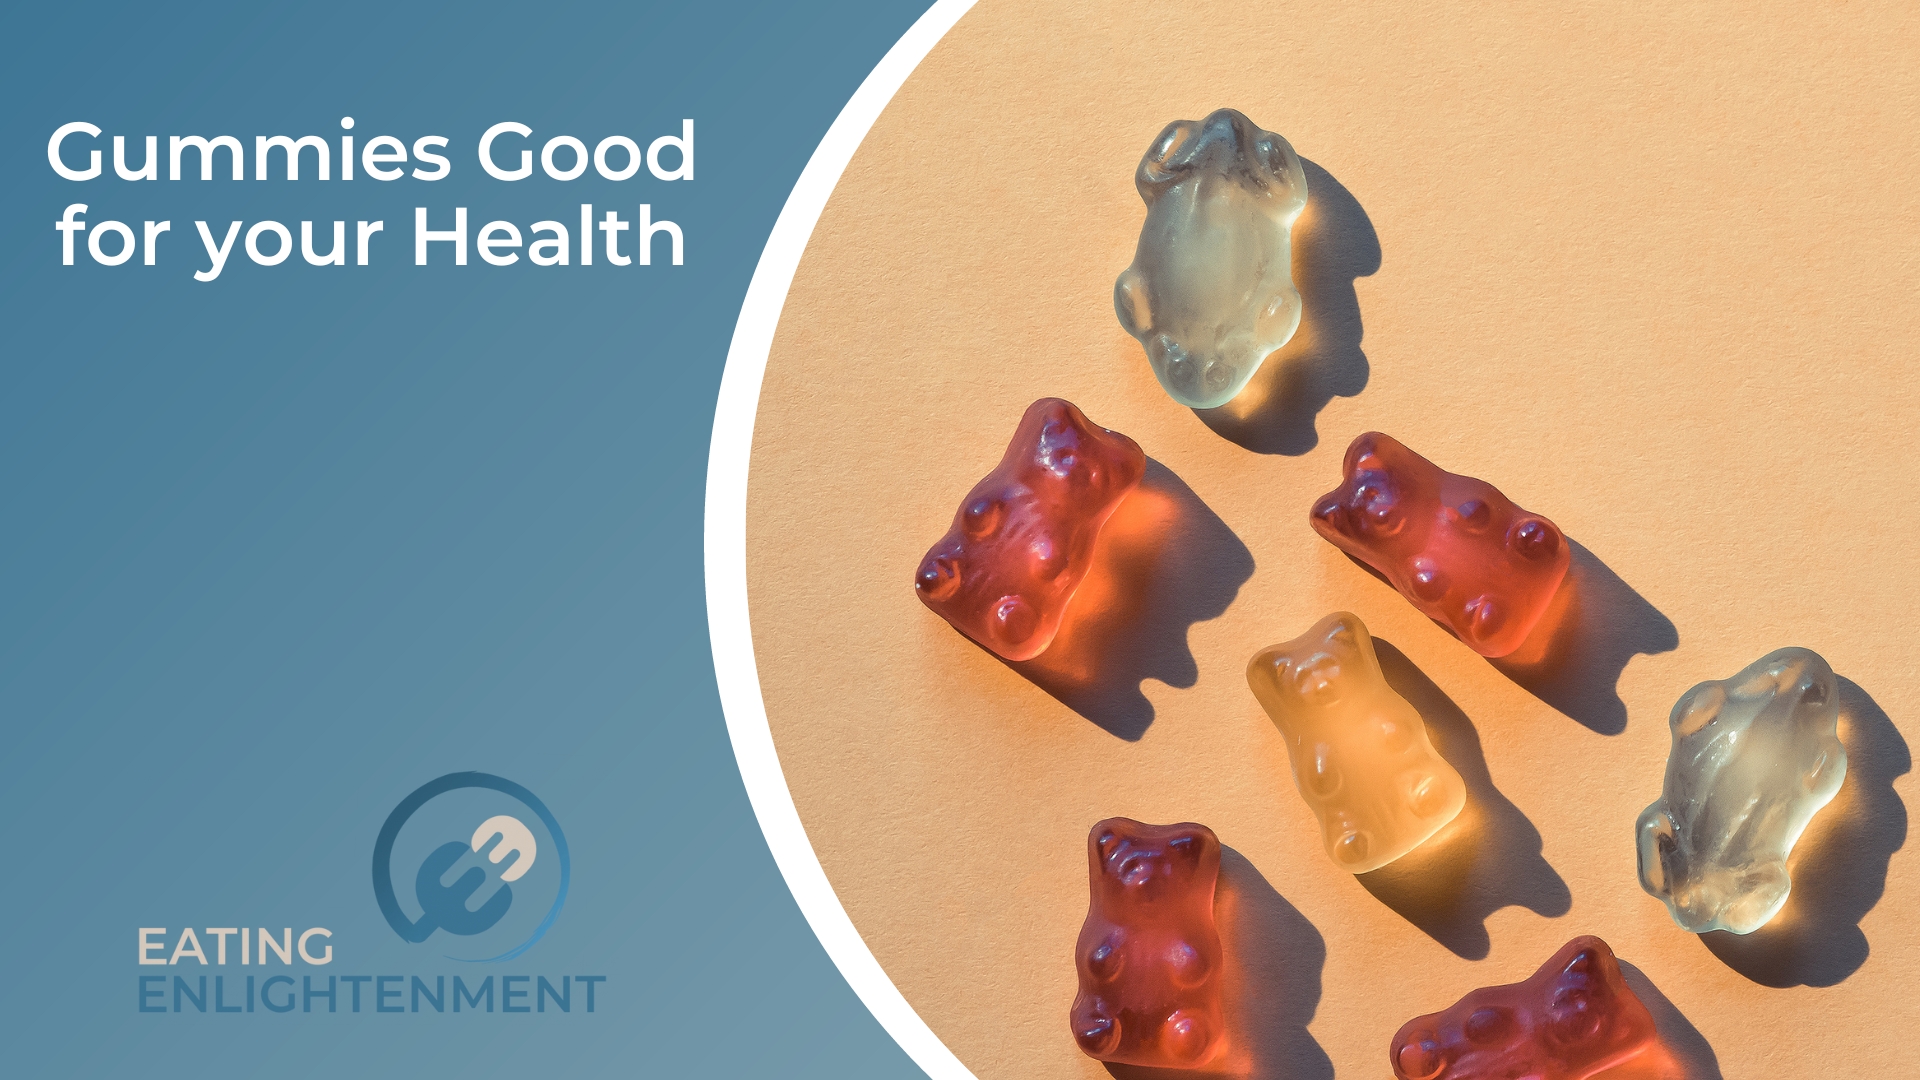 Gummies Good for your Health